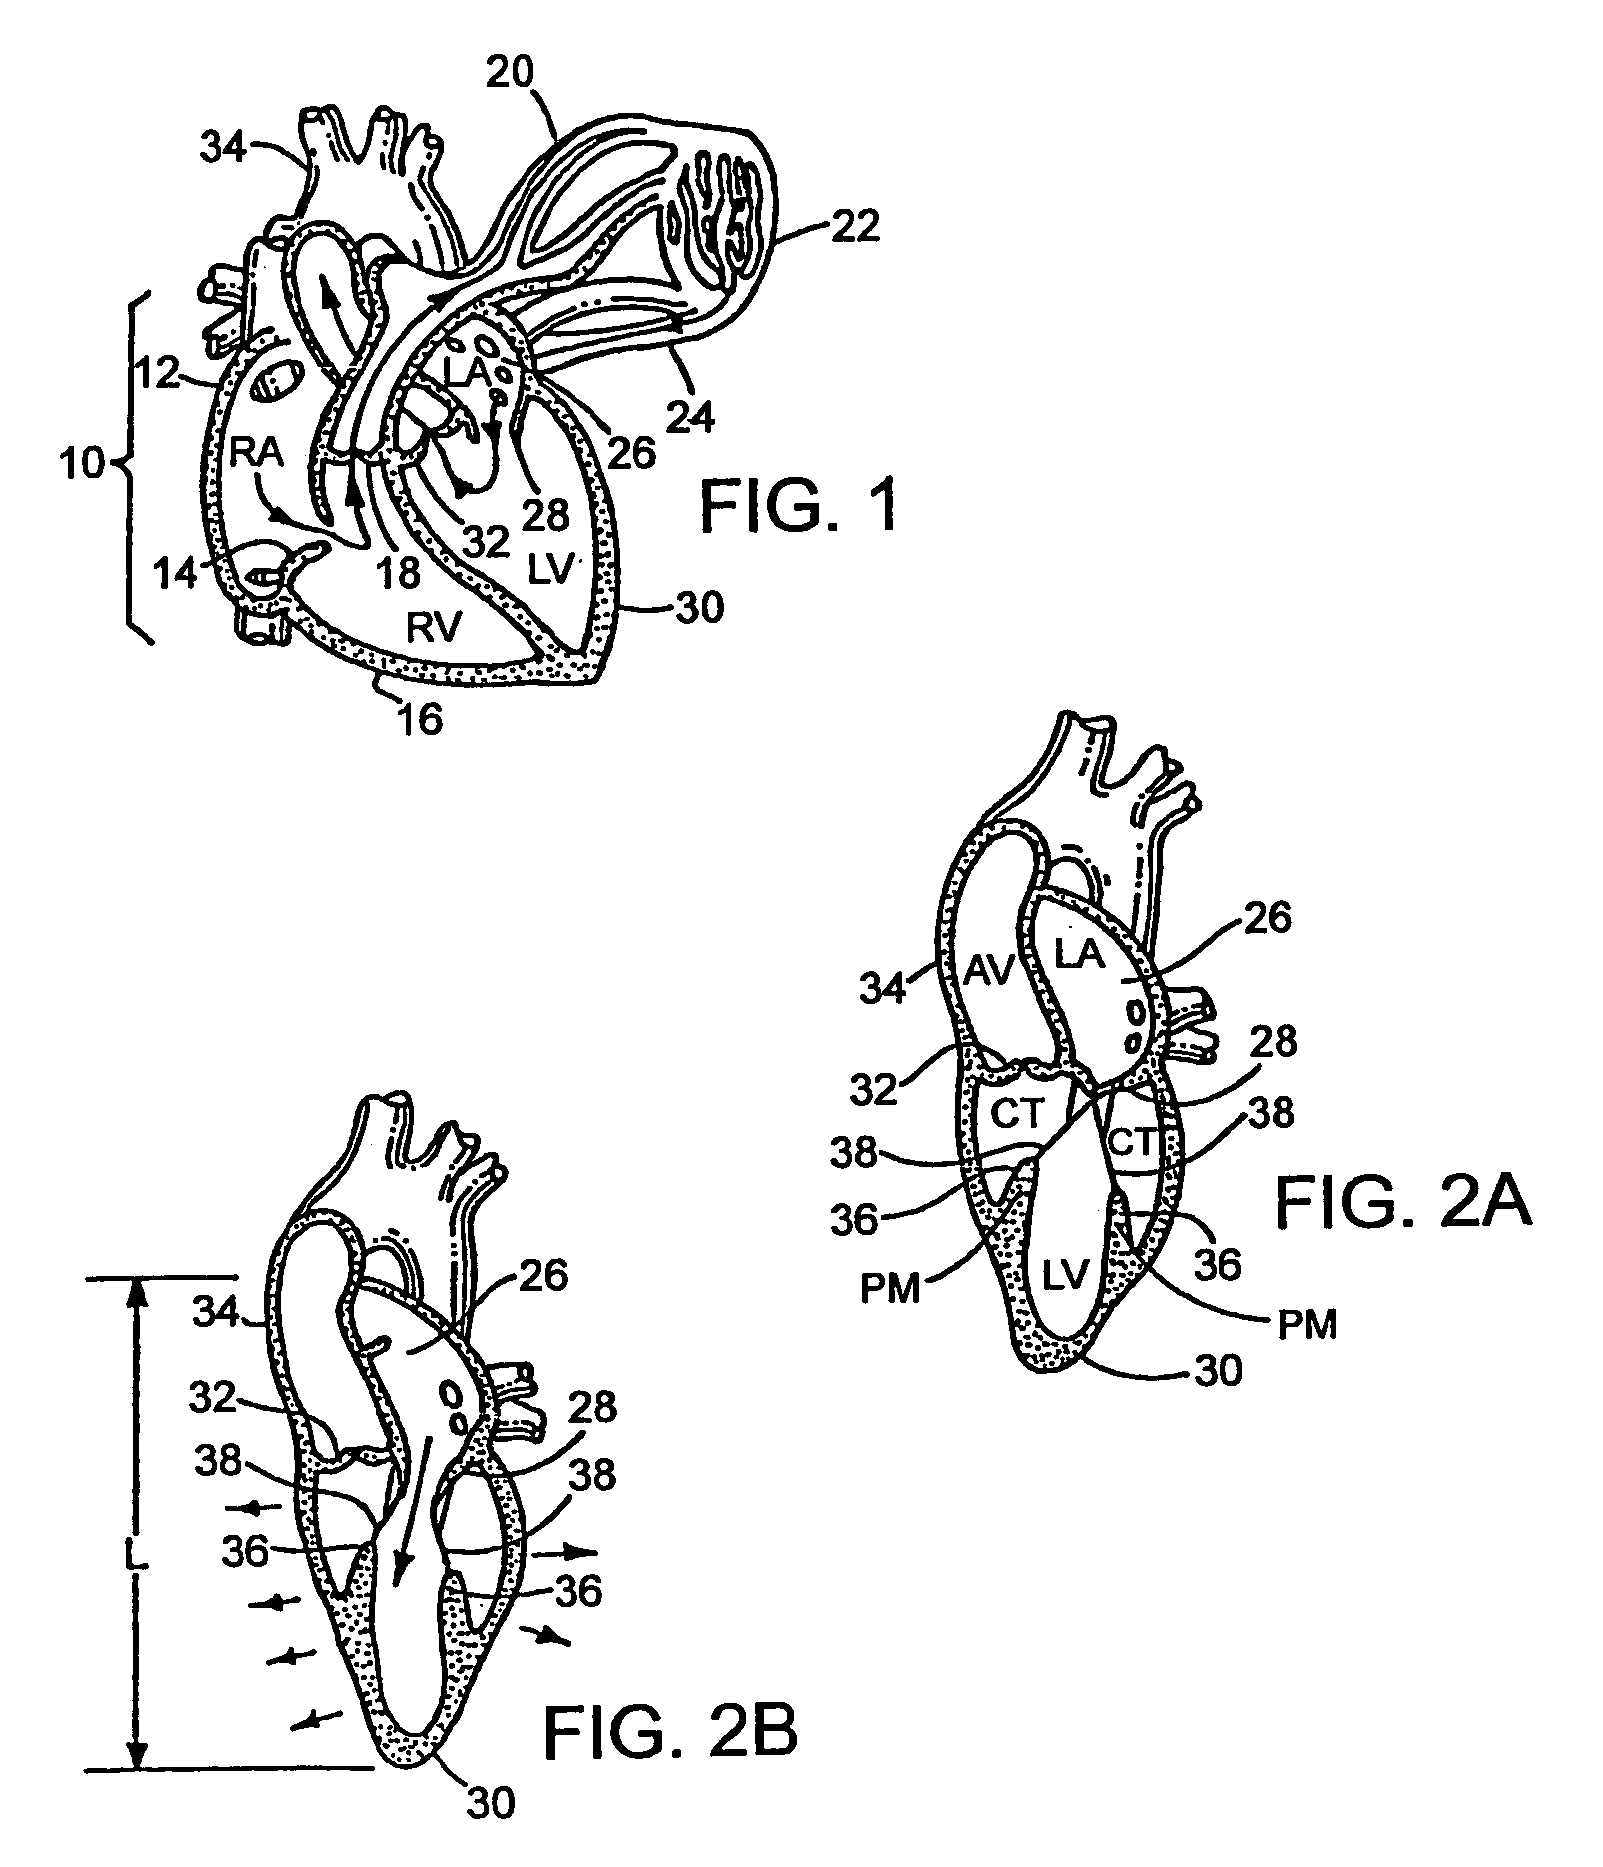 Device to permit offpump beating heart coronary bypass surgery